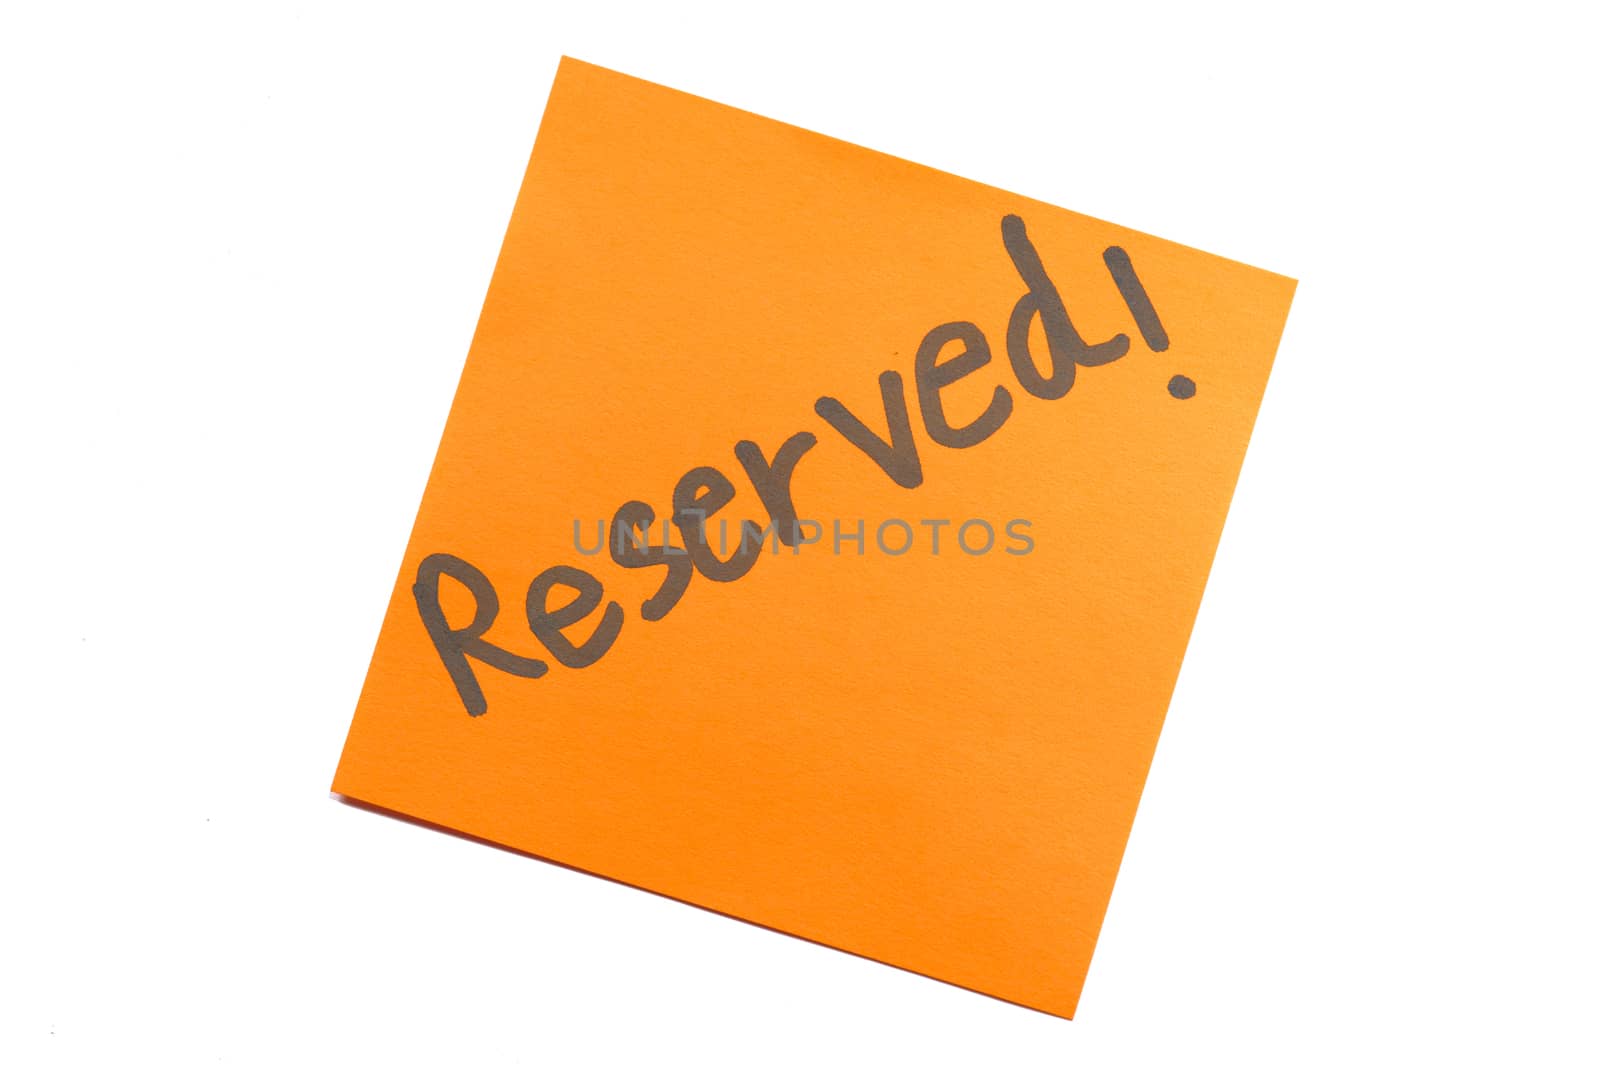 Sticky note with text "Reserved" by letoakin